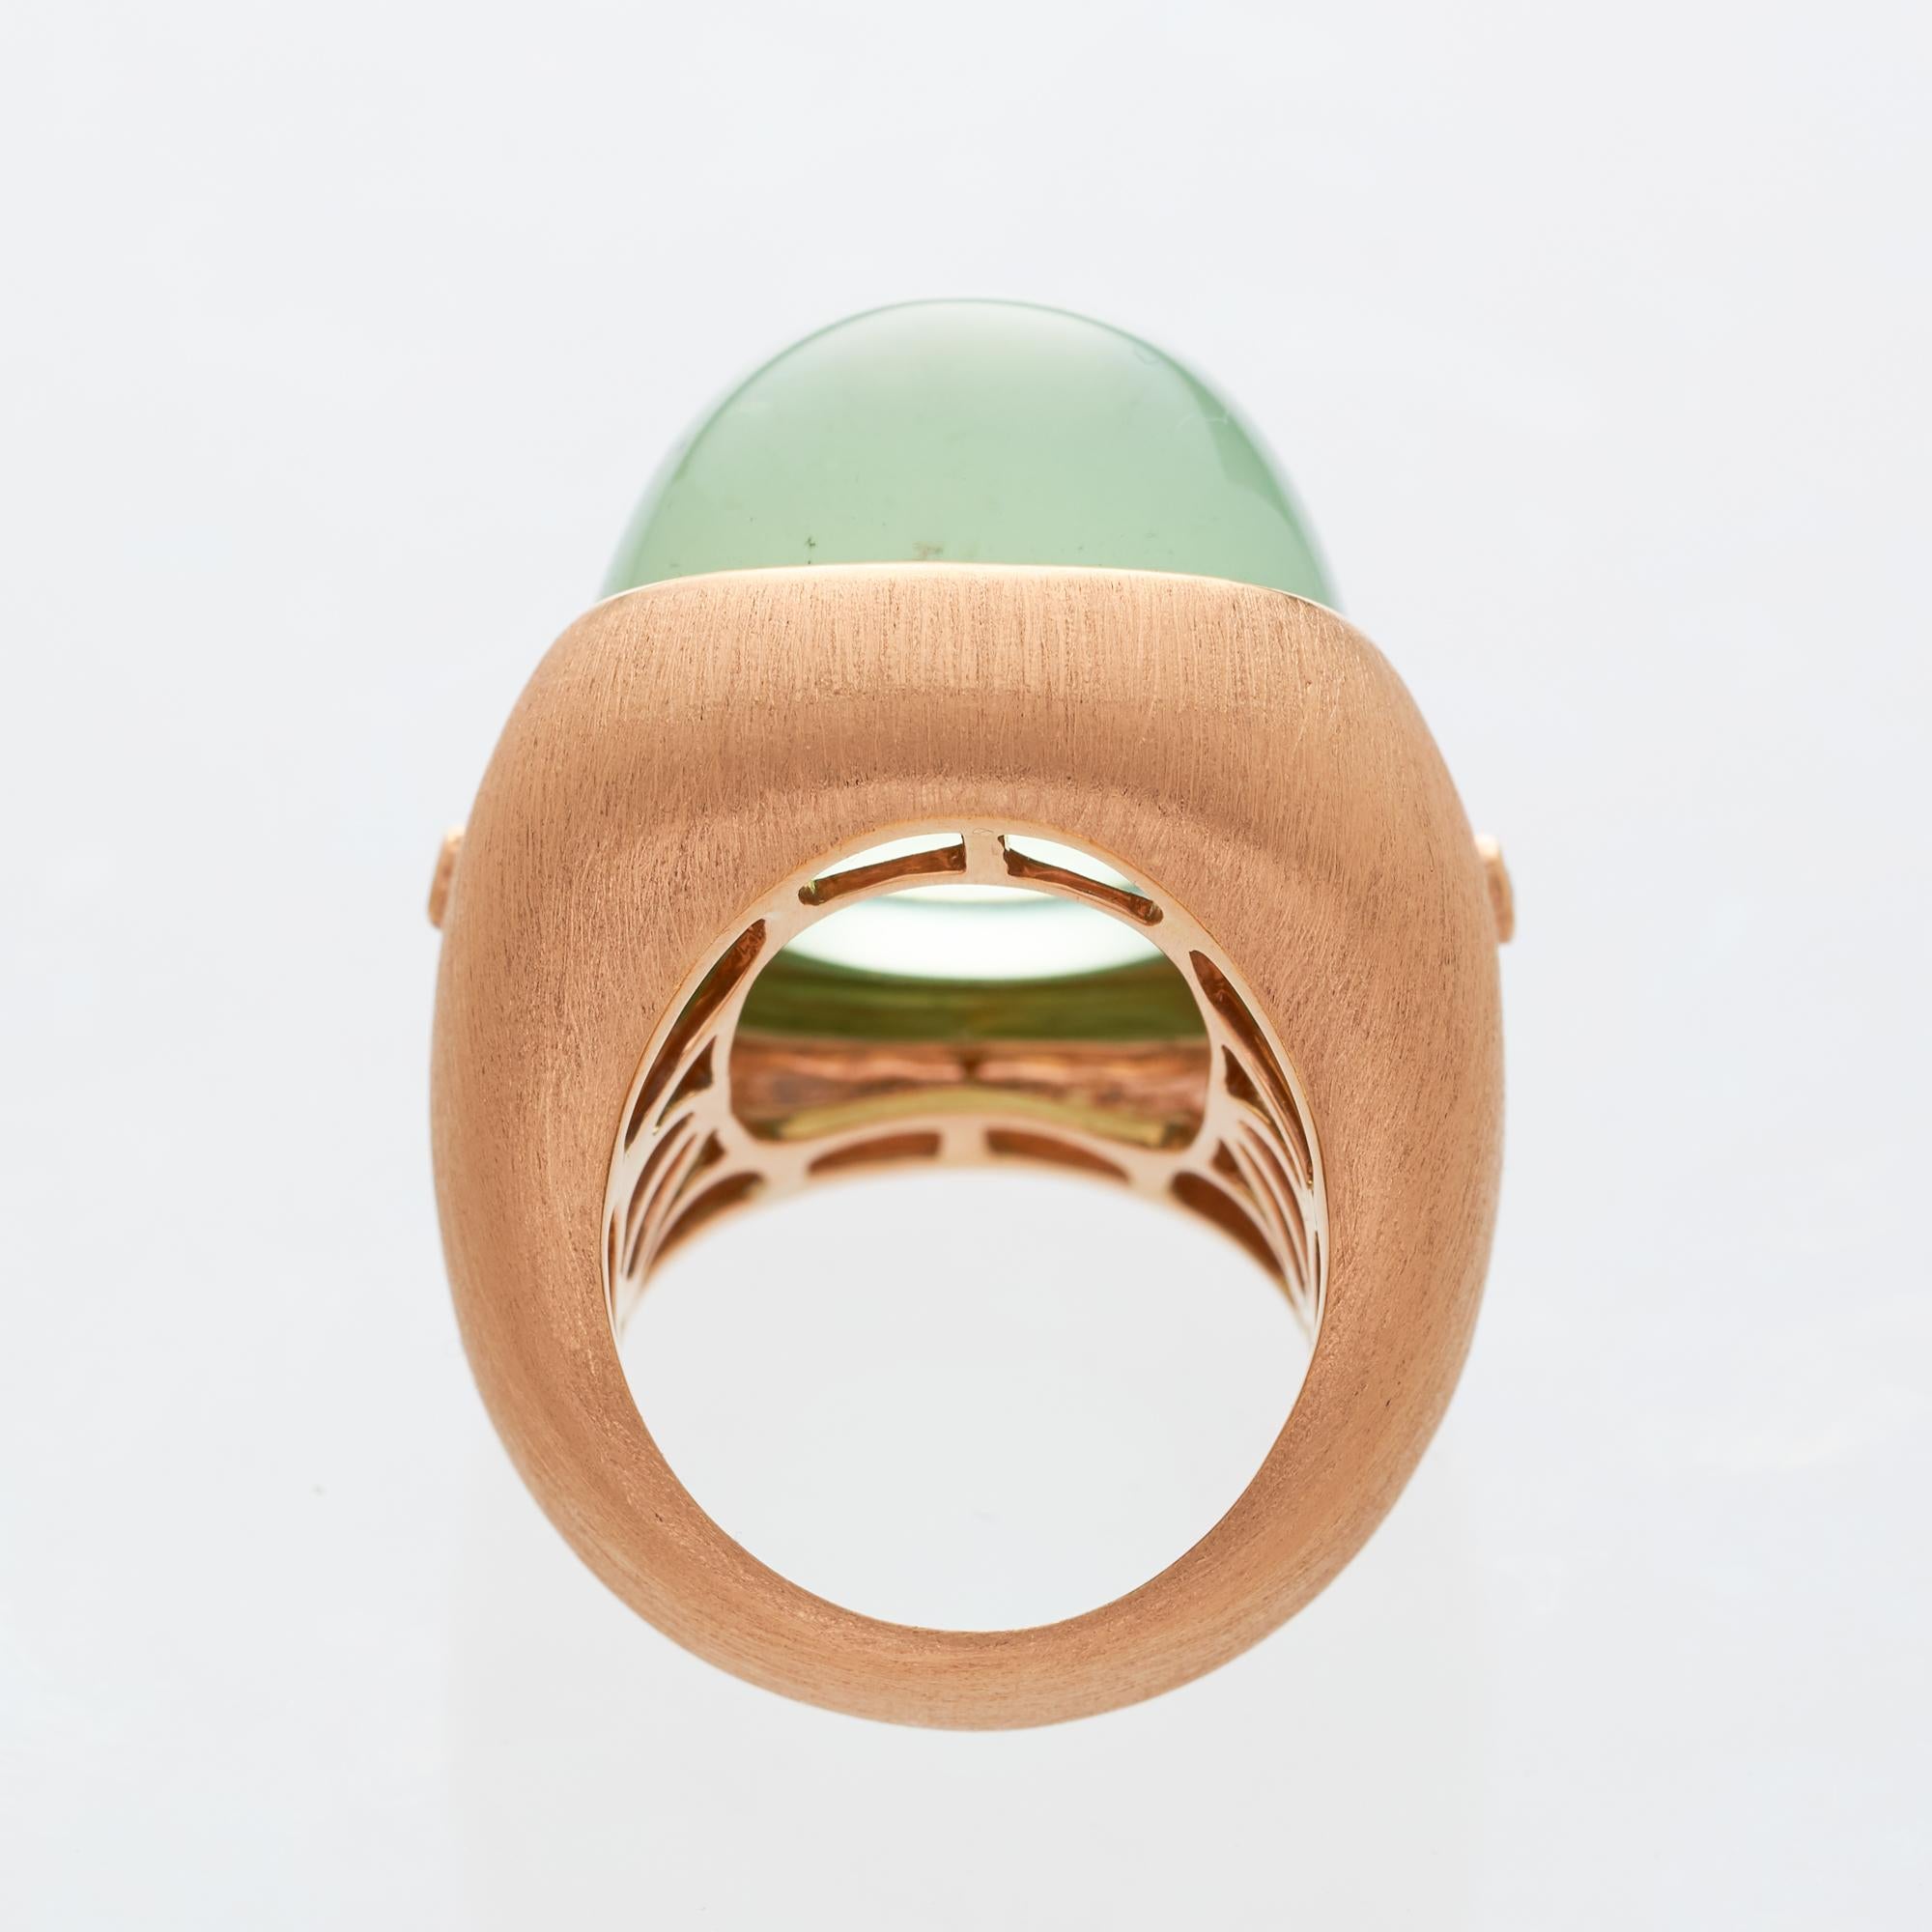 Cabochon Margot McKinney 18K Rose Gold Pale Green Tourmaline 55.81ct Ring with 2 Diamonds For Sale